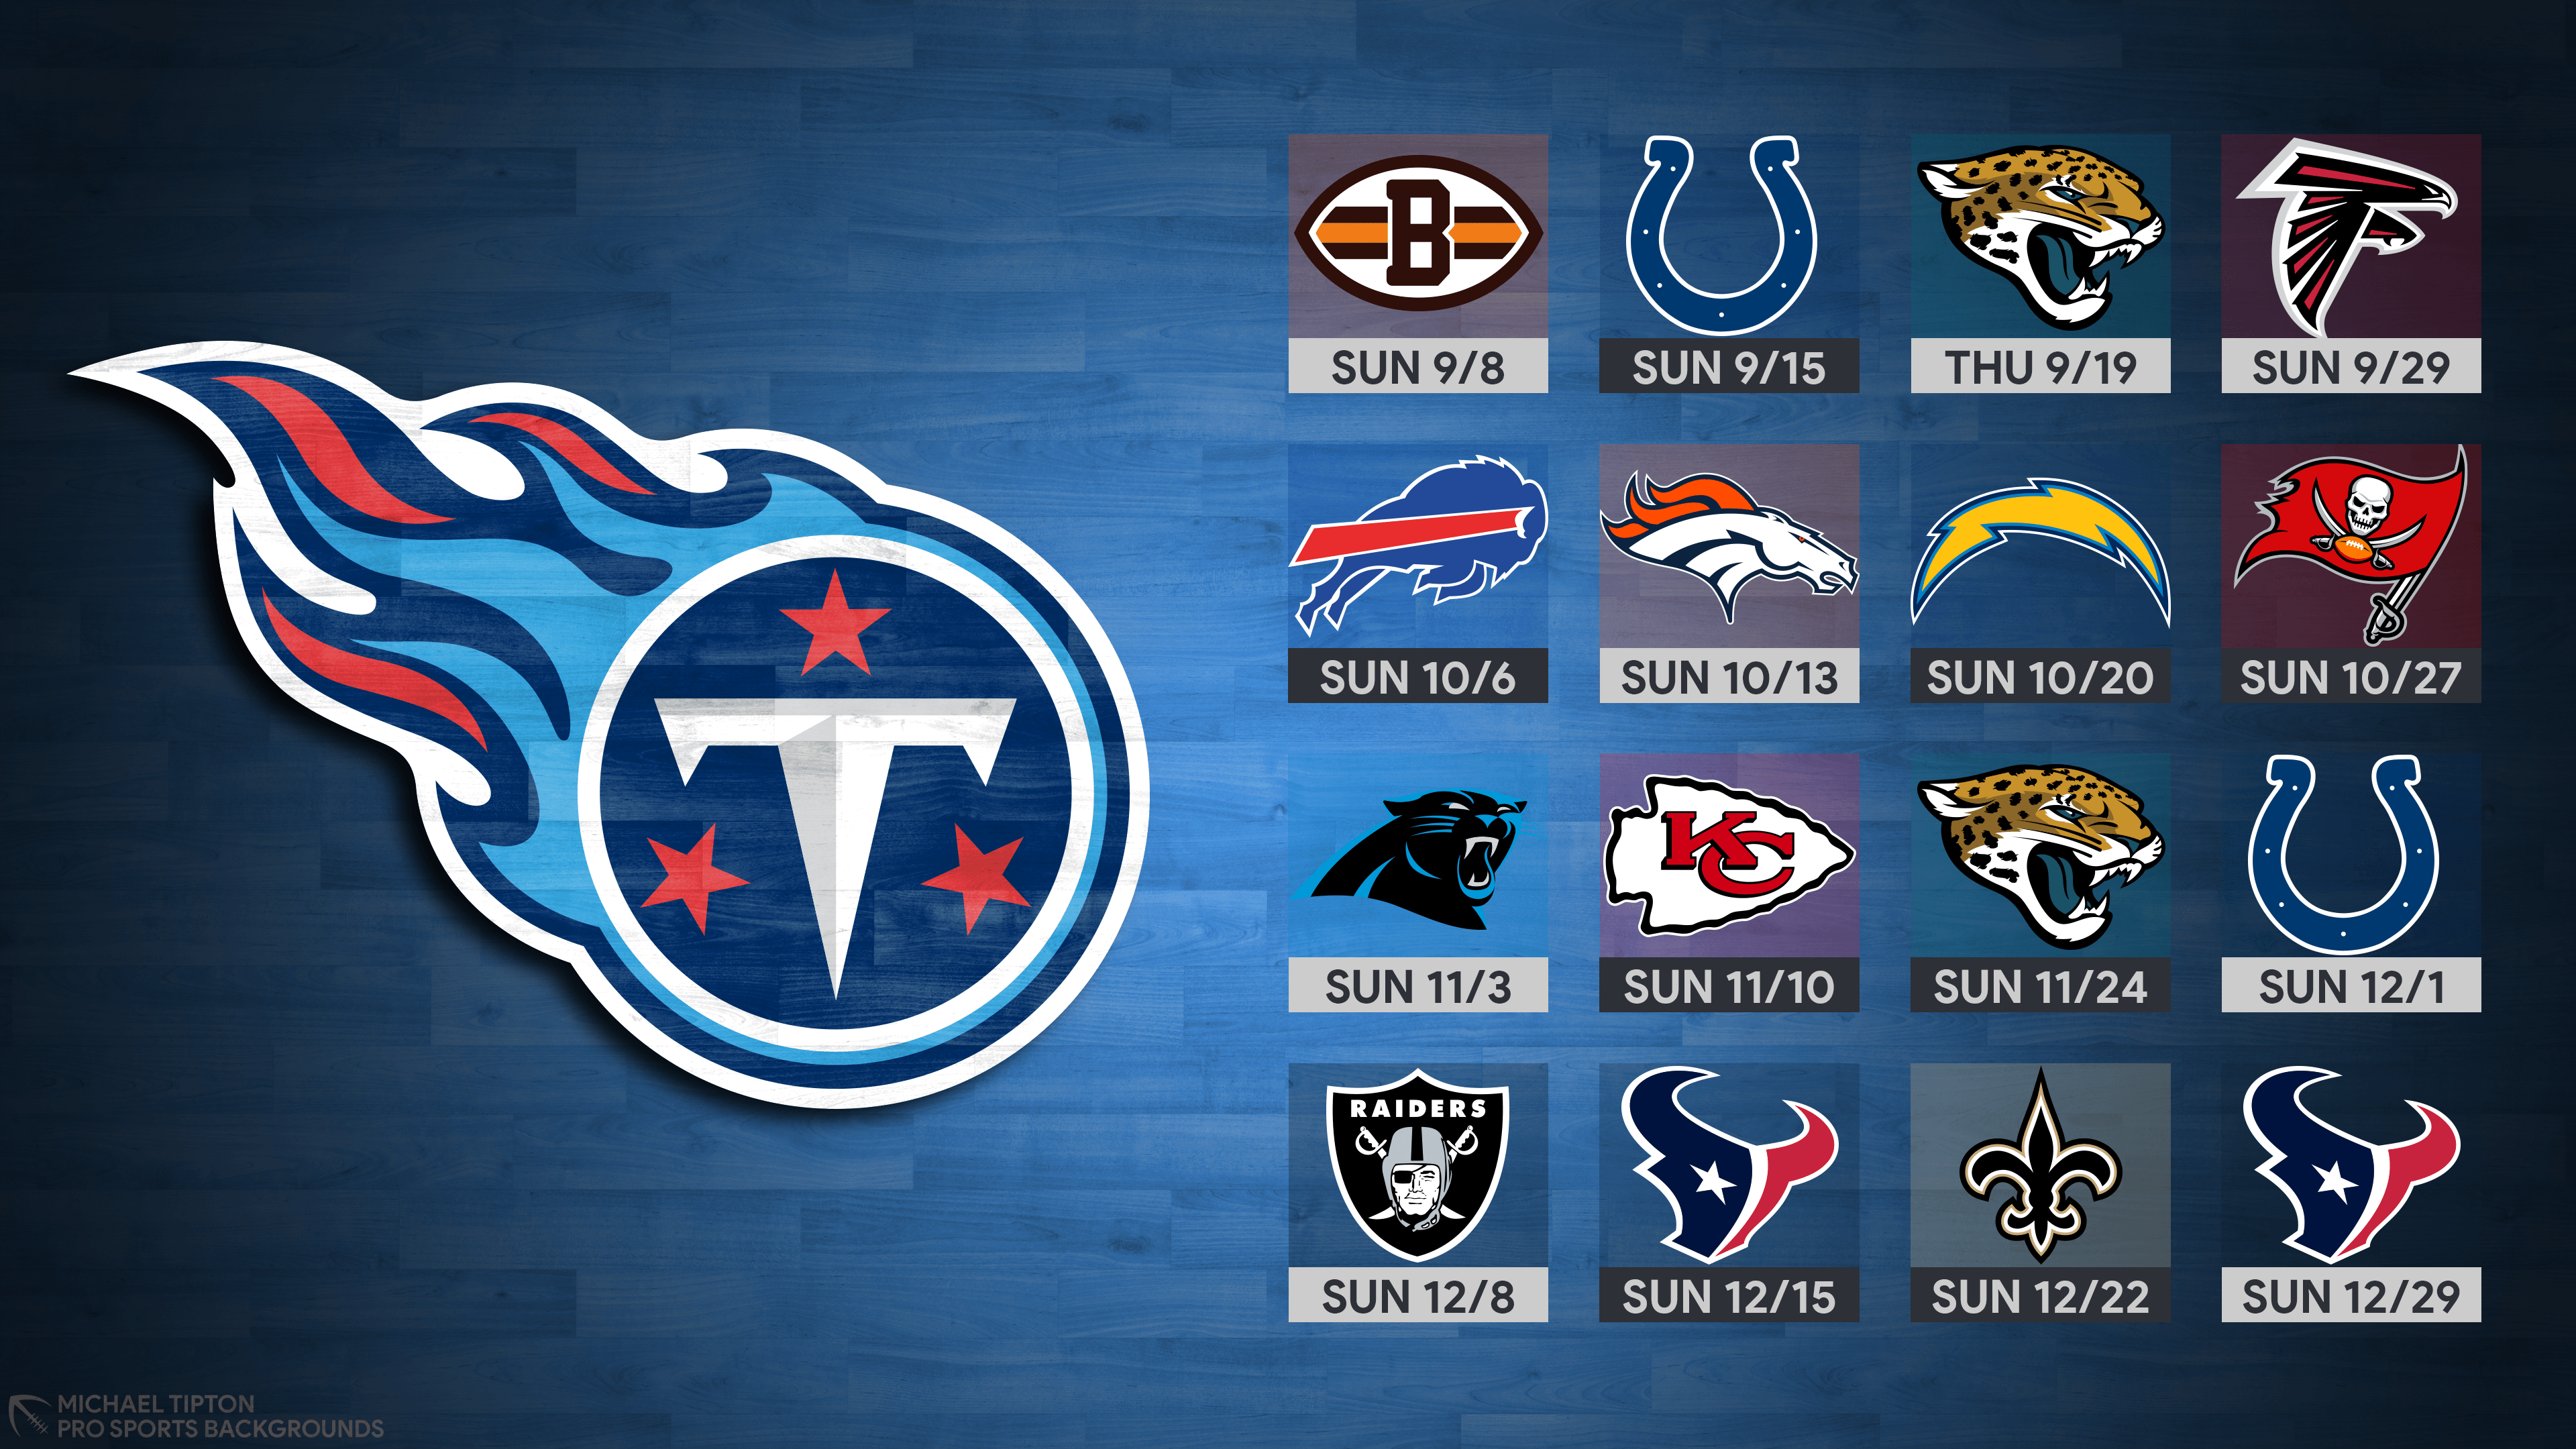 Tennessee Titans 2019 Wallpapers